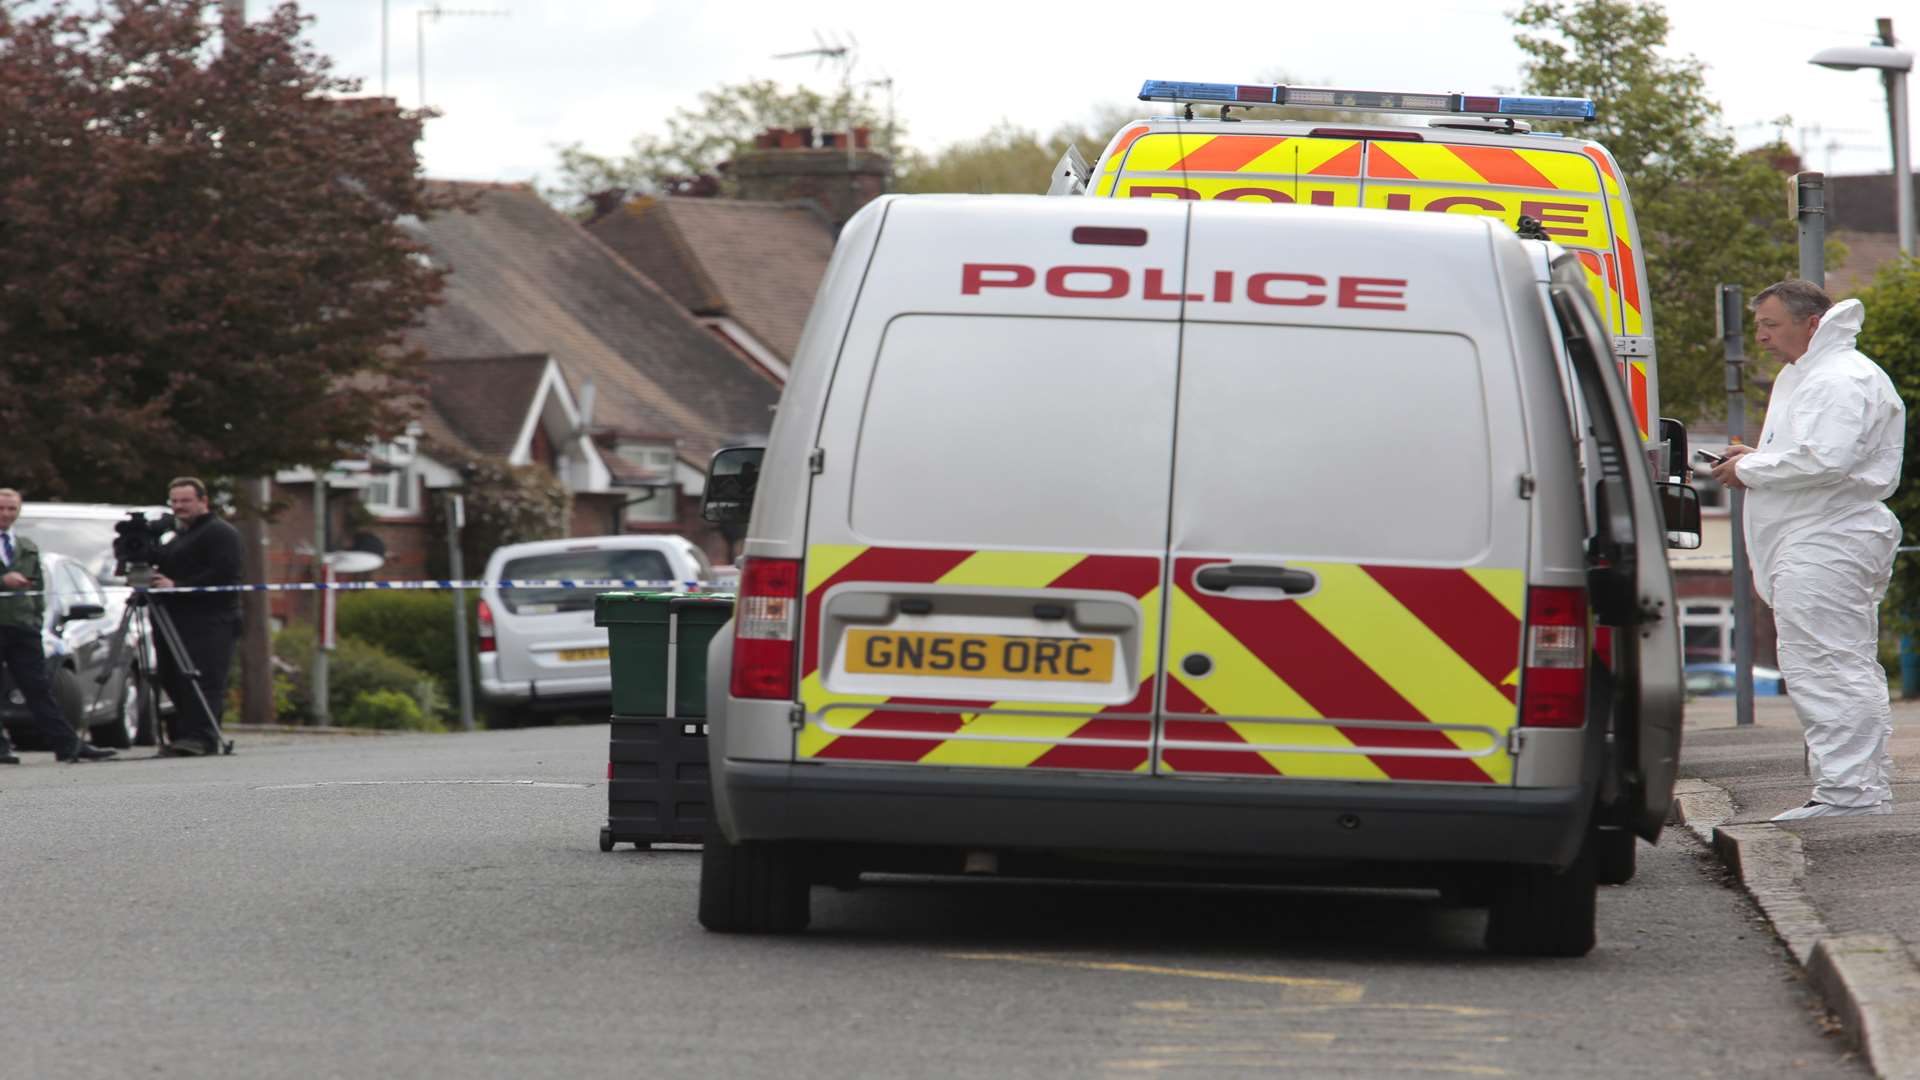 Forensic teams at the scene in Hectorage Road, Tonbridge. Picture: Martin Apps